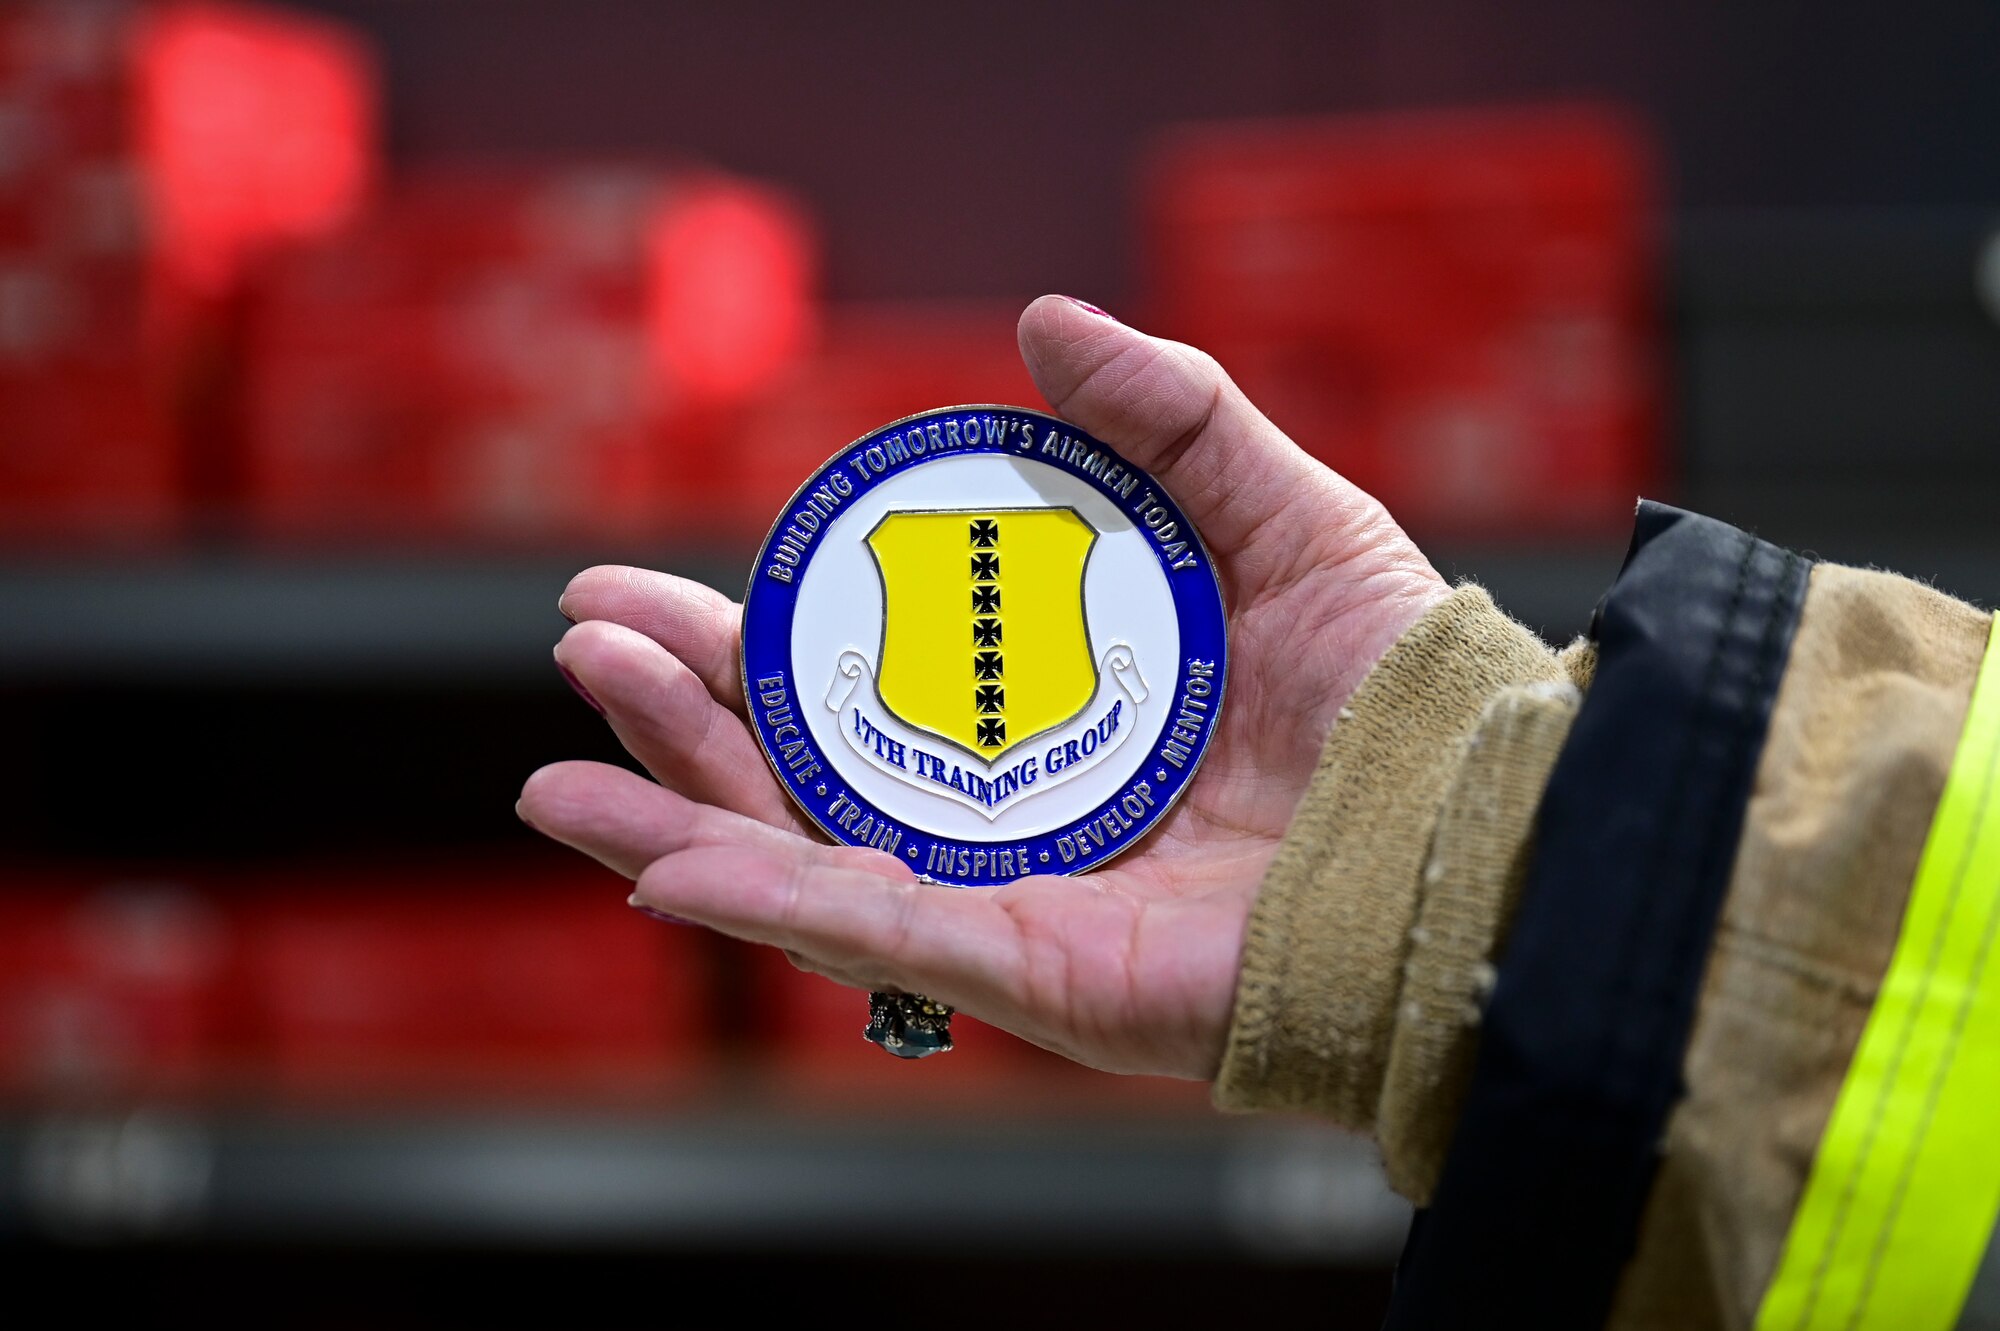 A coin presented by U.S. Air Force Col. Jason Kulchar,17th Training Group commander, is held by an honorary commander at the Louis F. Garland Department of the Defense Fire Academy, Goodfellow Air Force Base, Texas, Jan. 12, 2024. Their immersion with the 17th Training Group cumulated with a tour where Kulchar presented each honorary commander with a coin. Coins are a traditional keepsake given to those recognized by leadership for significant accomplishments. (U.S. Air Force photo by Airman 1st Class Madison Collier)